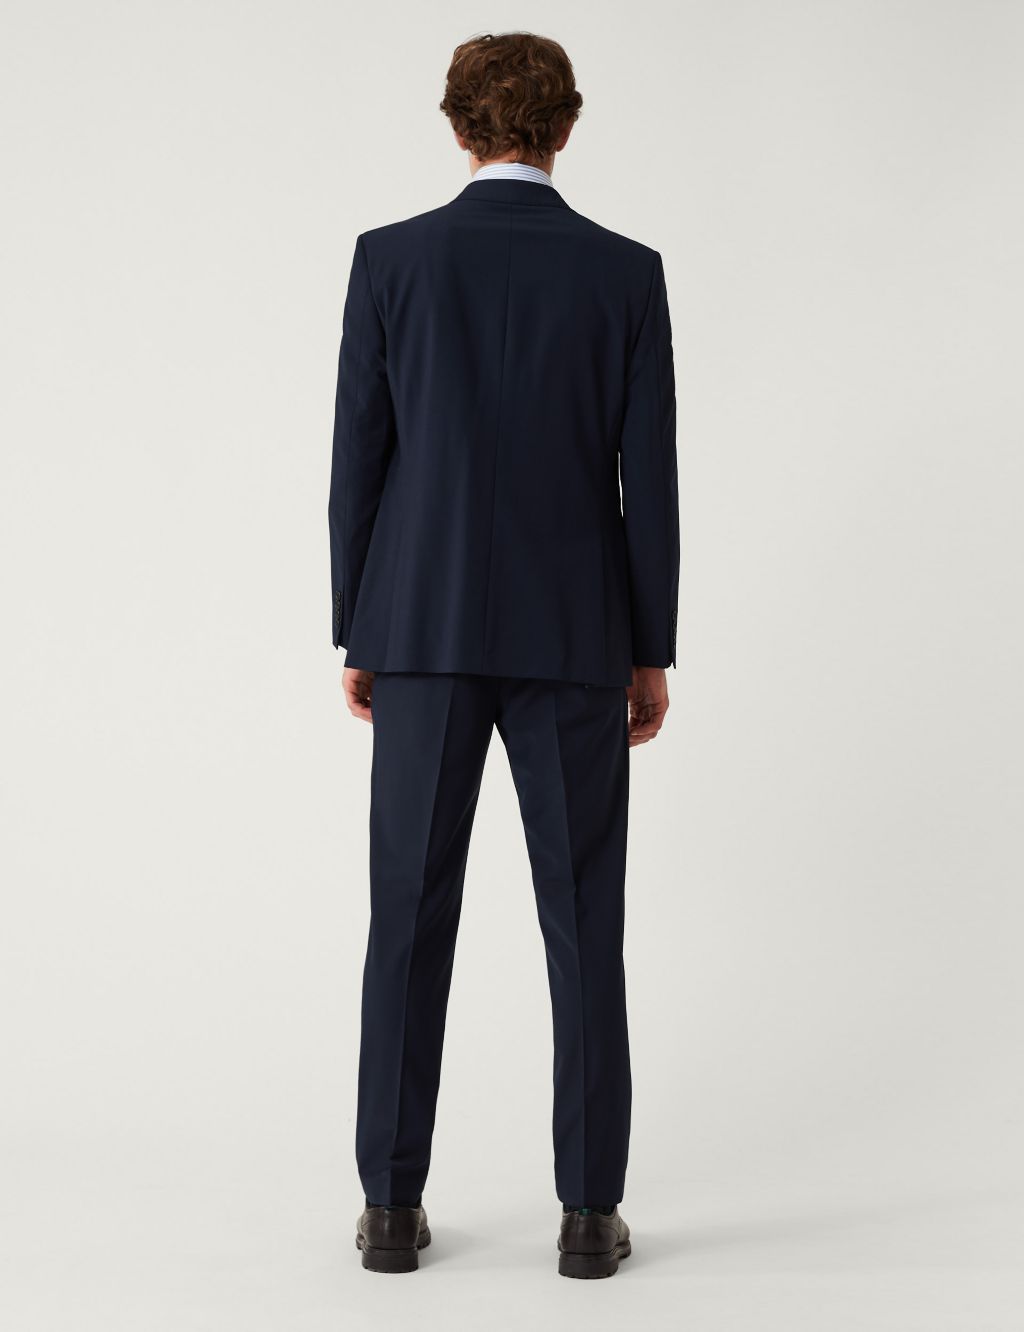 The Ultimate Regular Fit Suit image 3